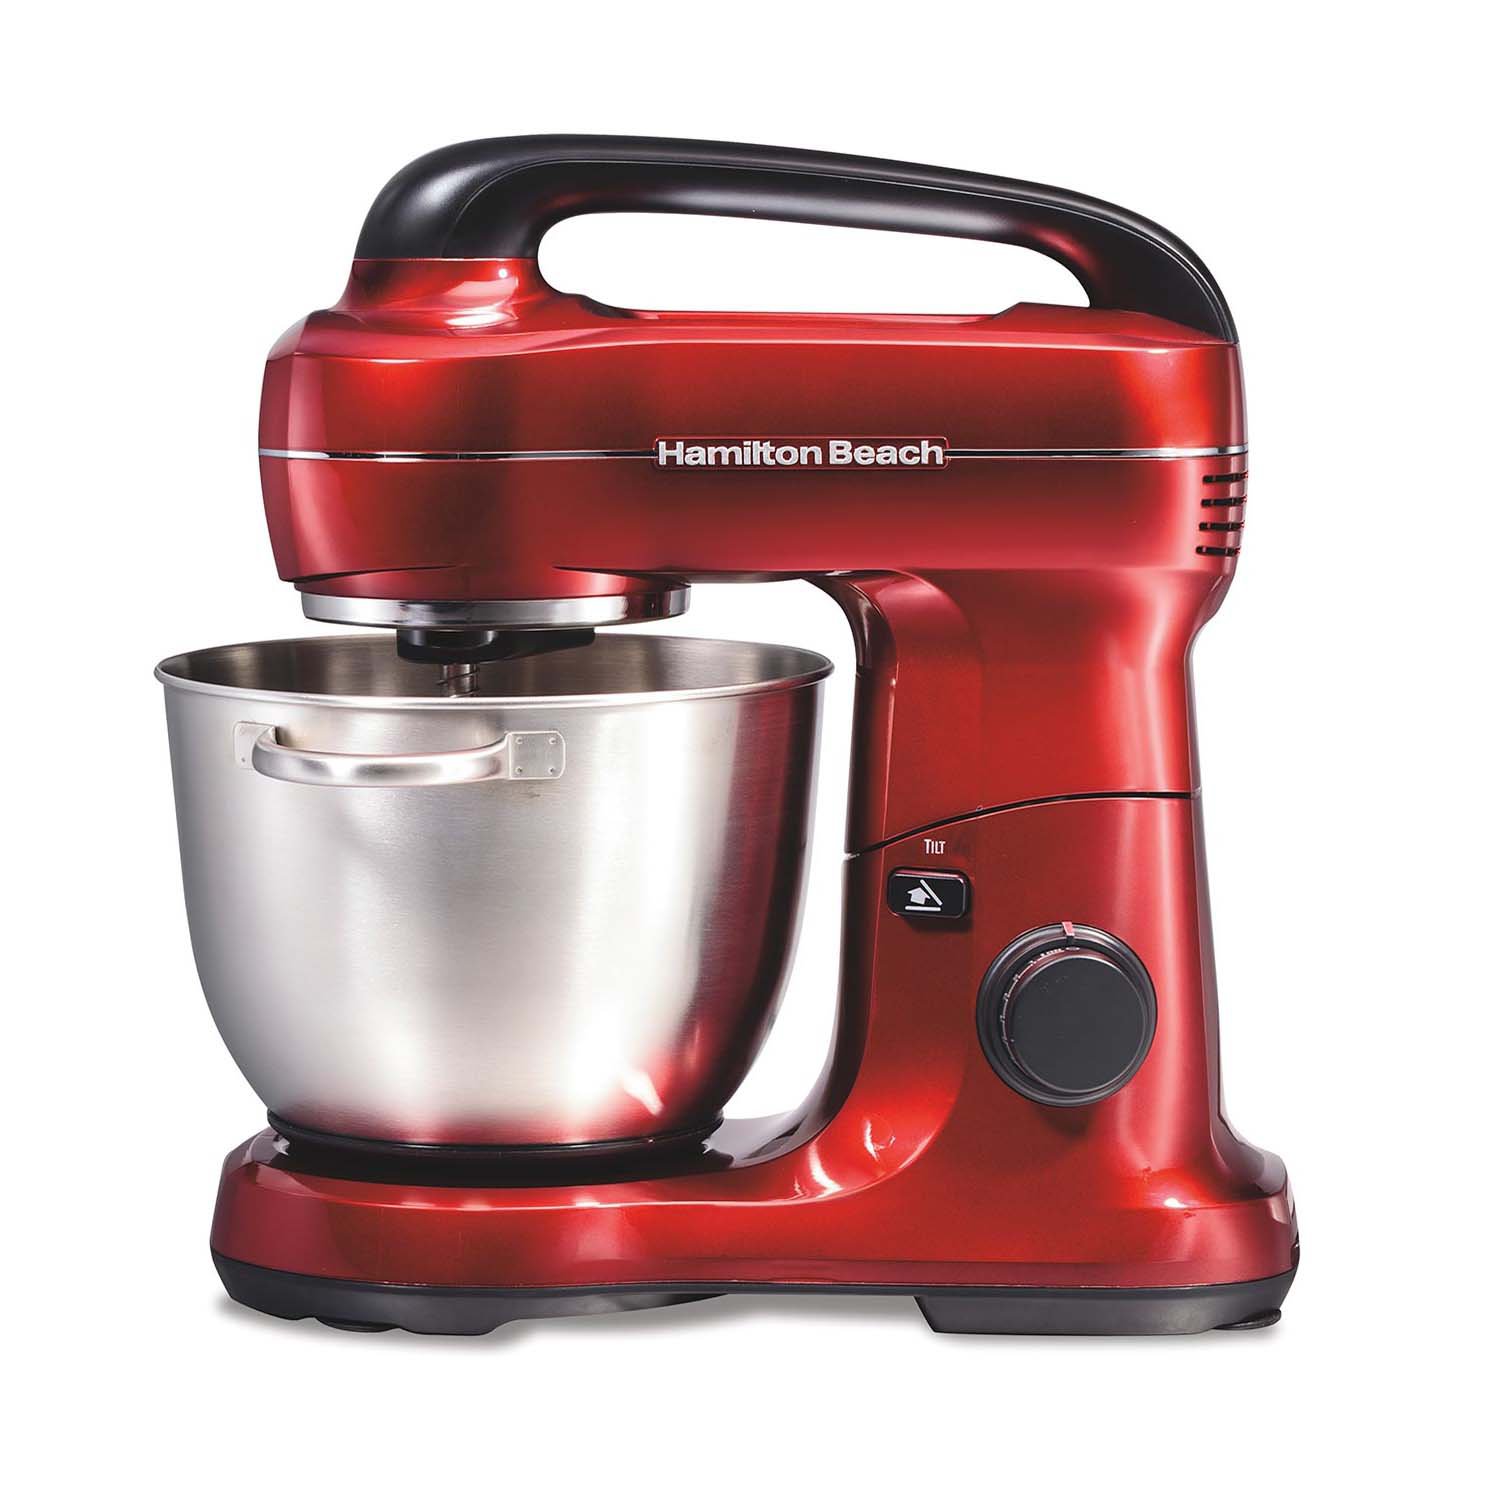 Buy the Hamilton Beach Red Stand Kitchen Mixer With Attachments